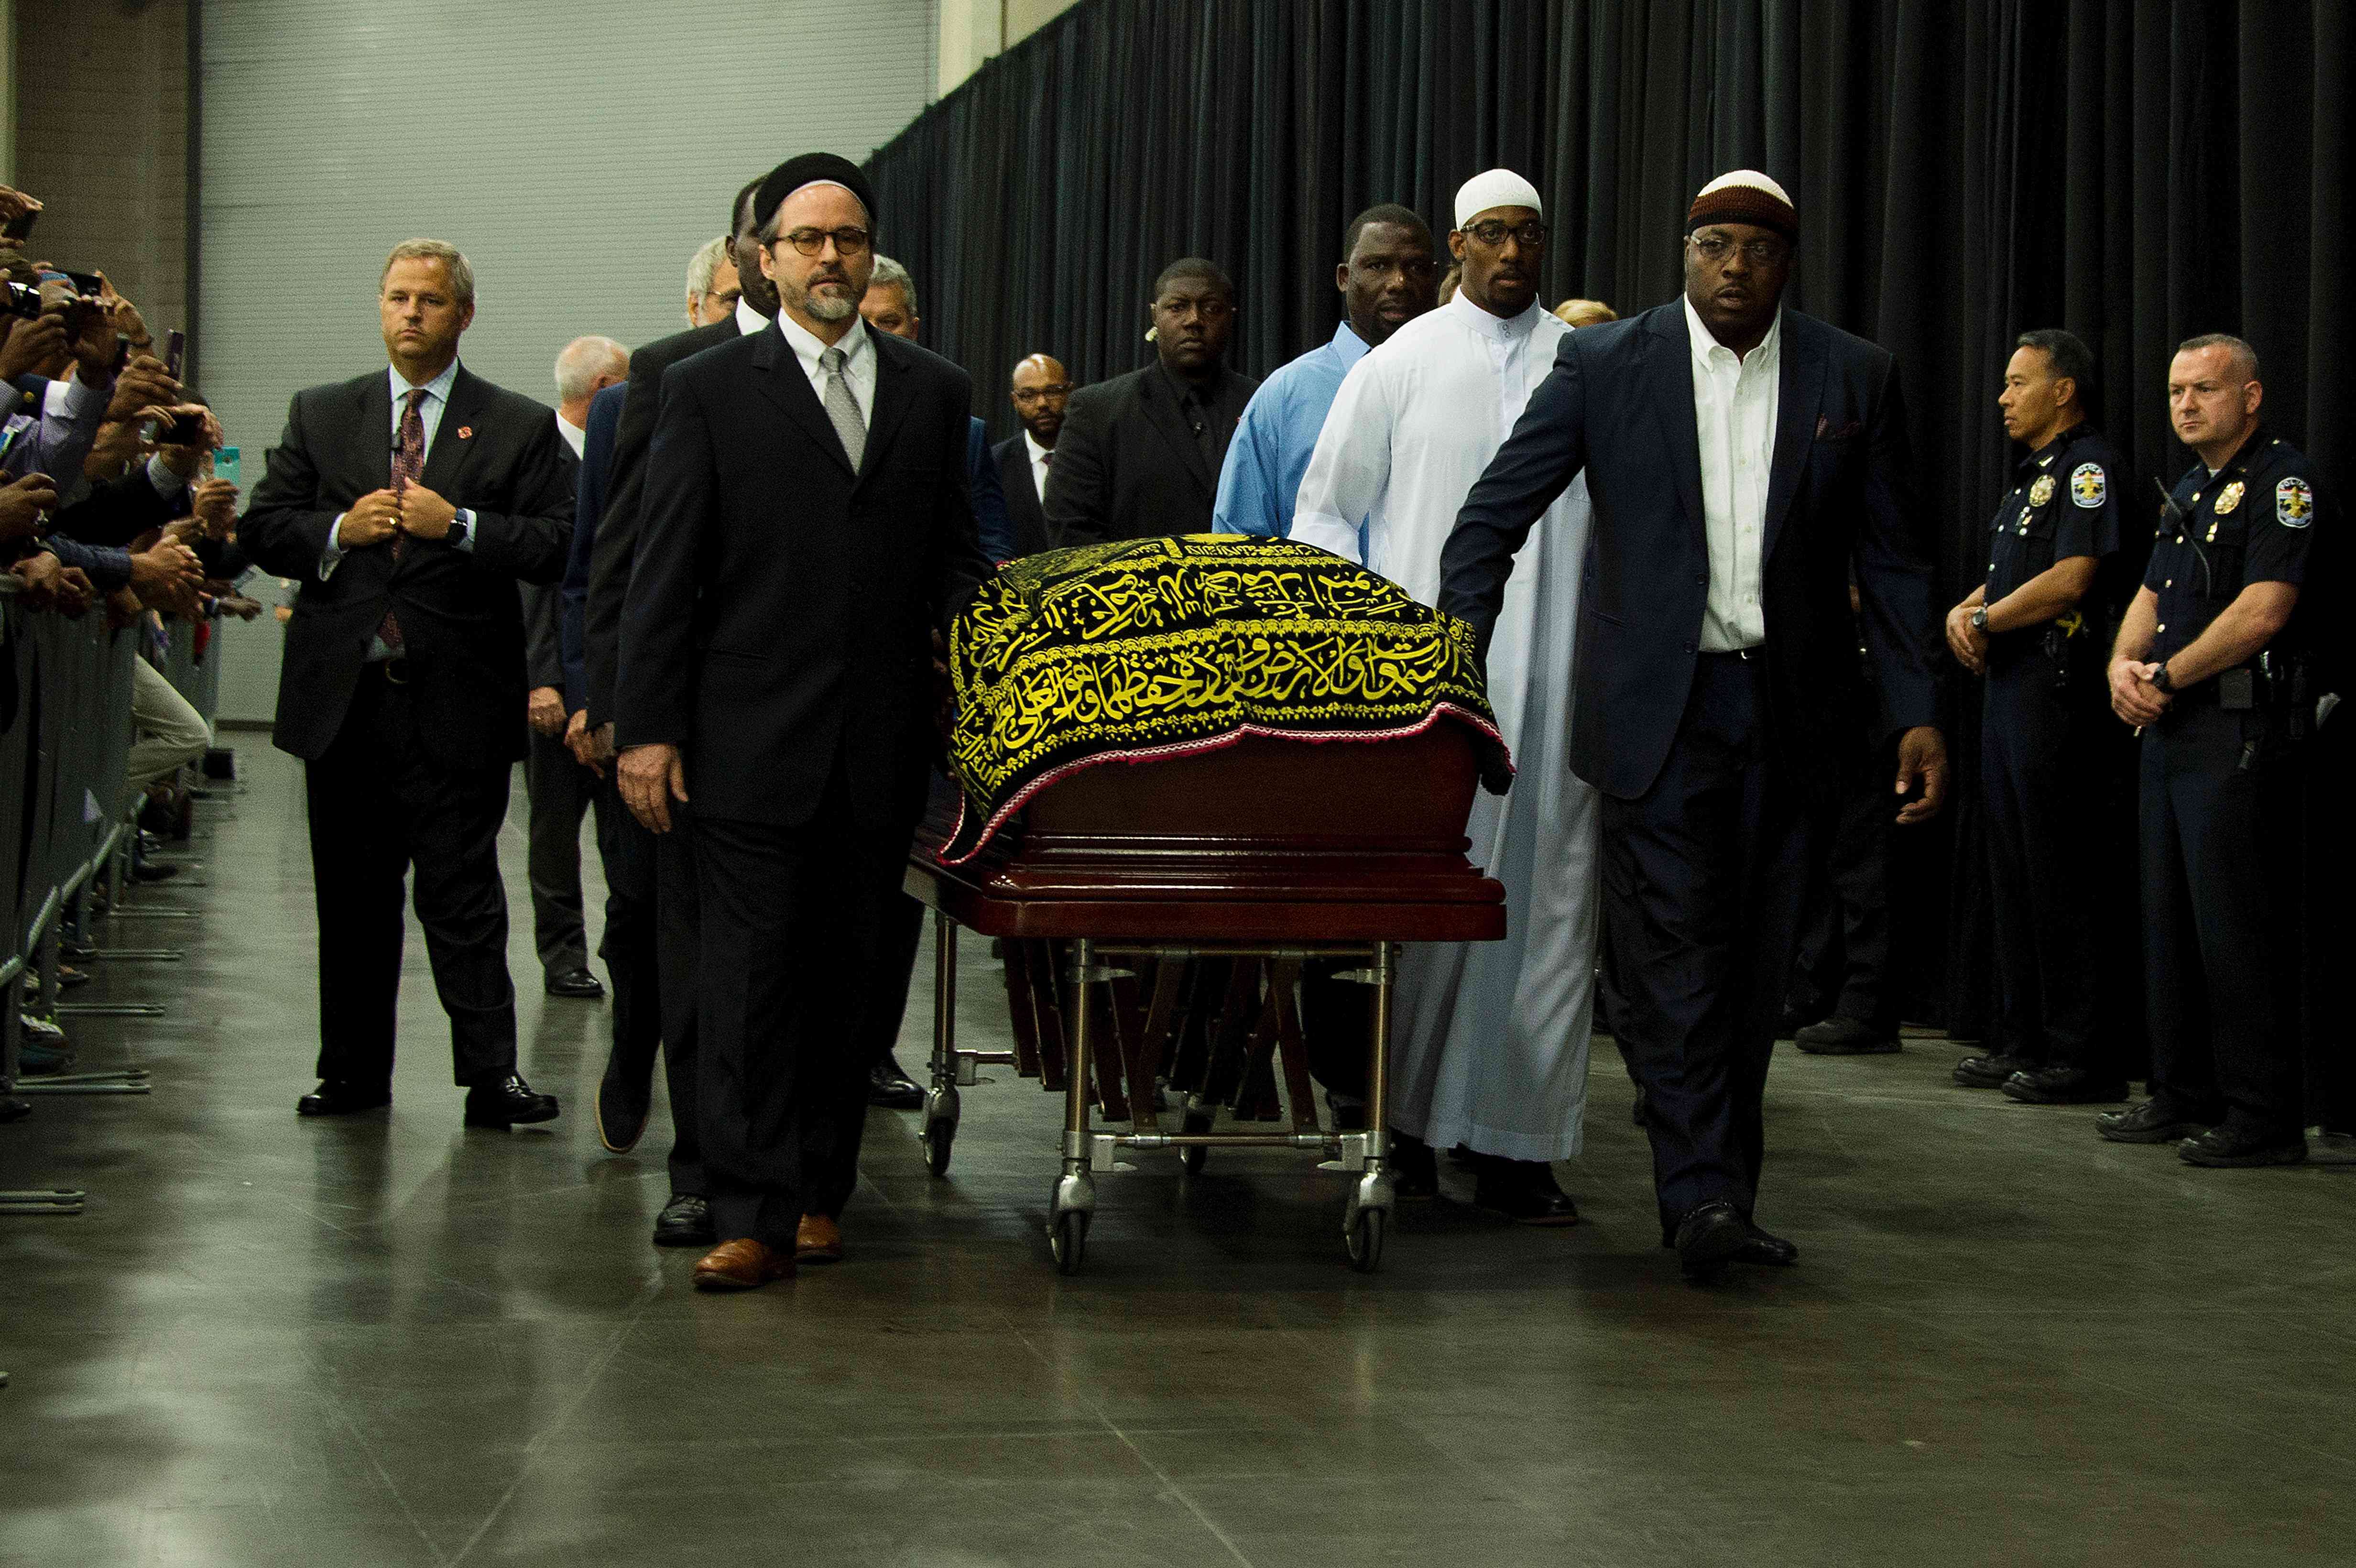 Pallbearers escort the casket of boxing legend Muhammad Ali during the Jenazah Muslim prayer service at Freedom Hall in Louisville, Kentucky, on Thursday. Photo: AFP